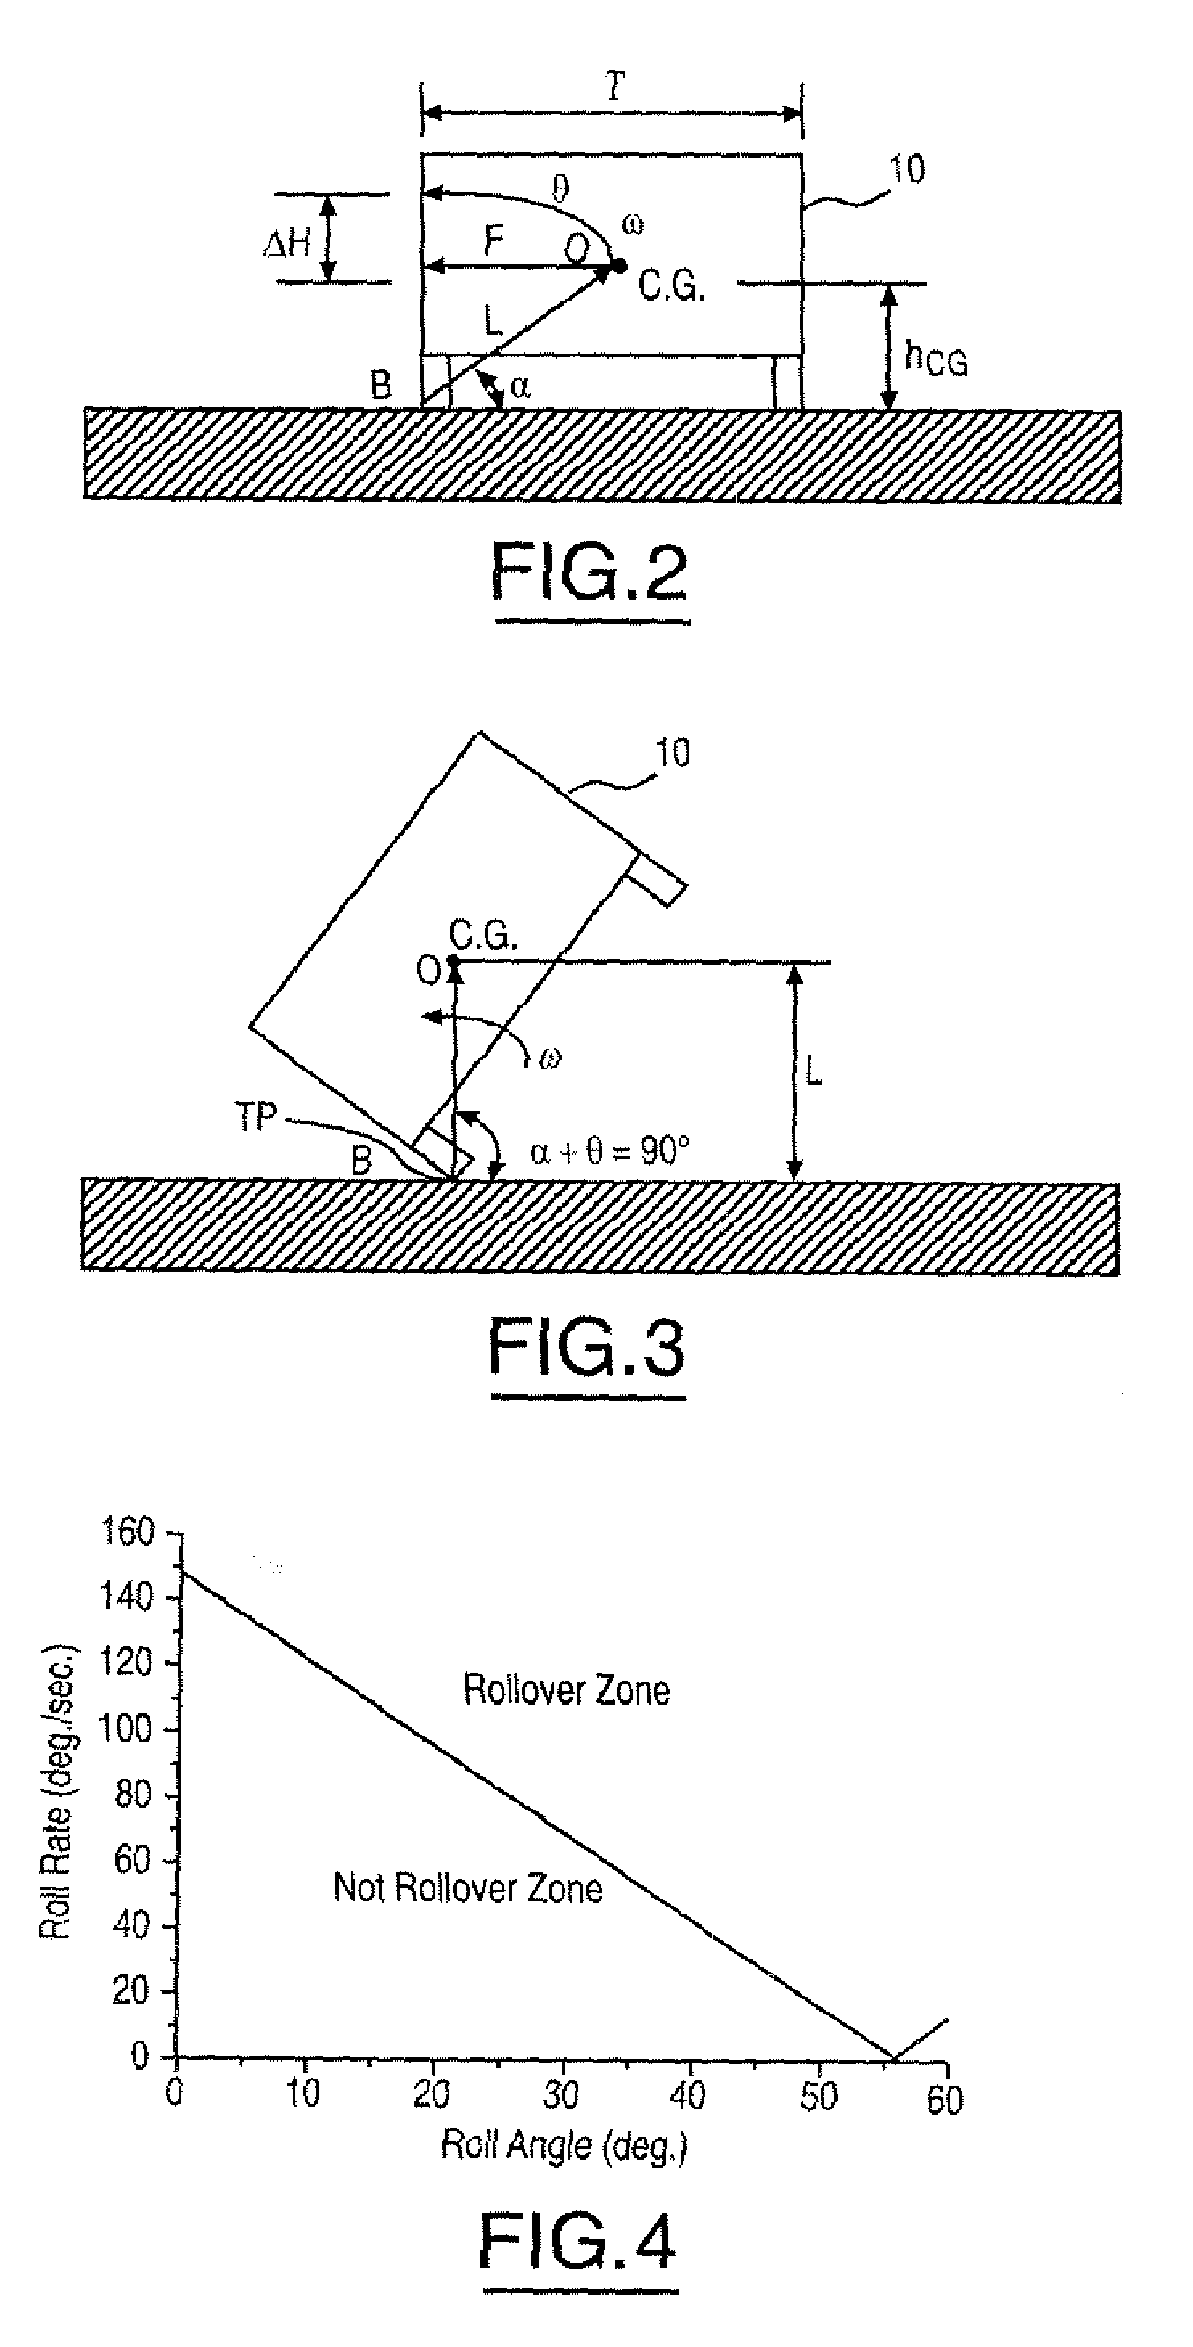 Method and apparatus for detecting rollover of an automotive vehicle based on a lateral kinetic energy rate threshold